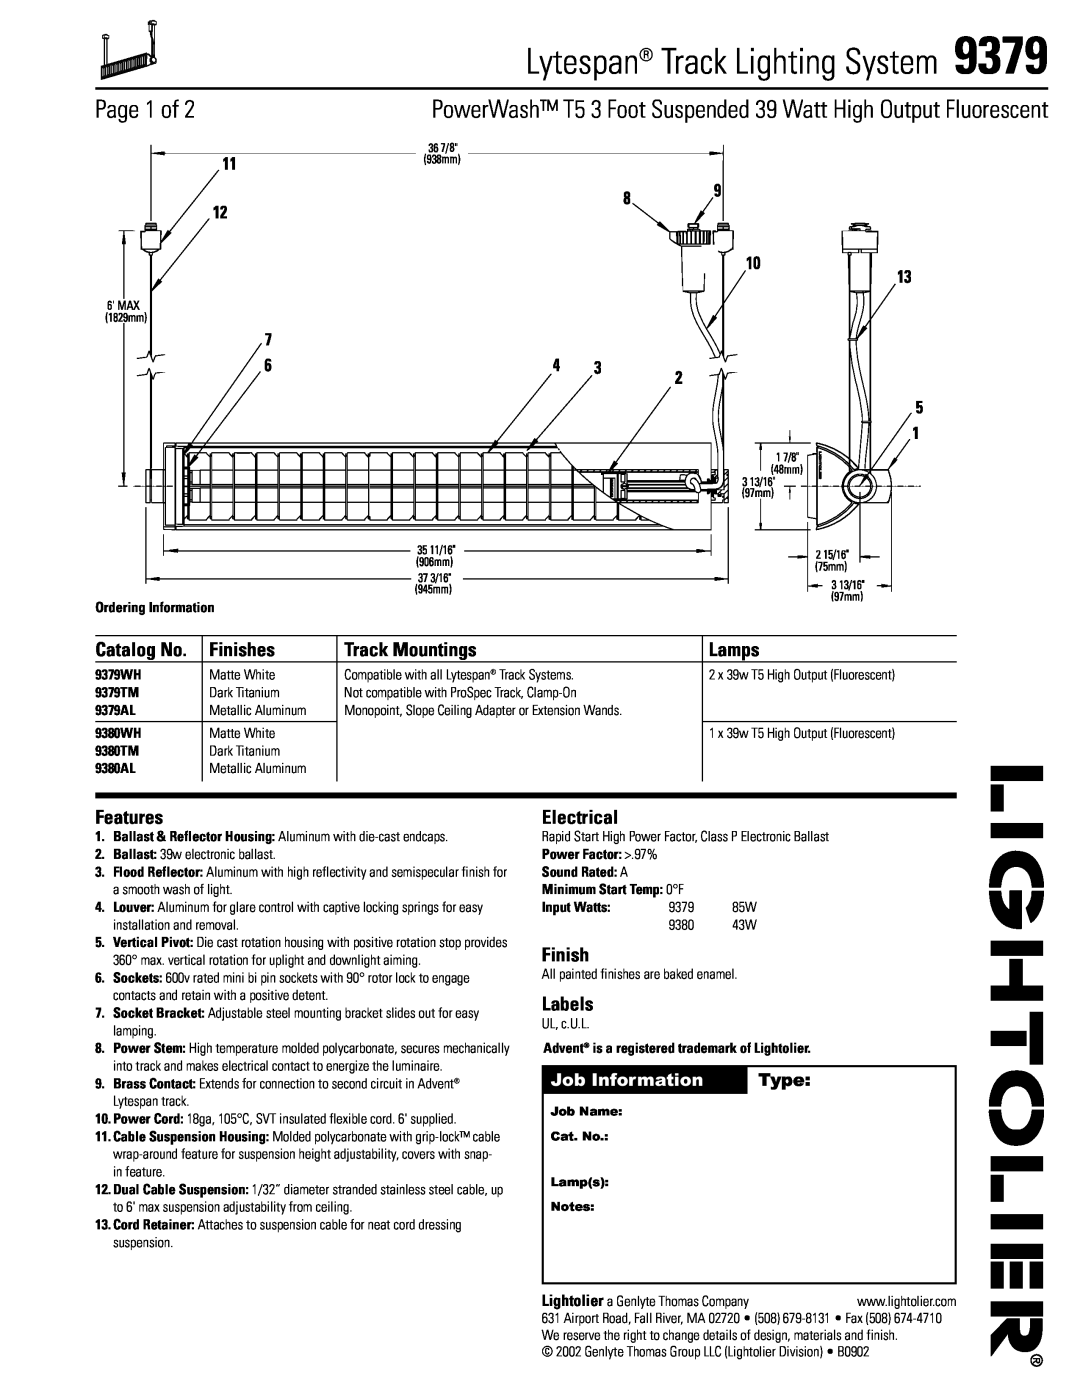 Lightolier 9379 manual Page 1 of, Finishes, Track Mountings, Lamps, Features, Electrical, Labels, Job Information, Type 